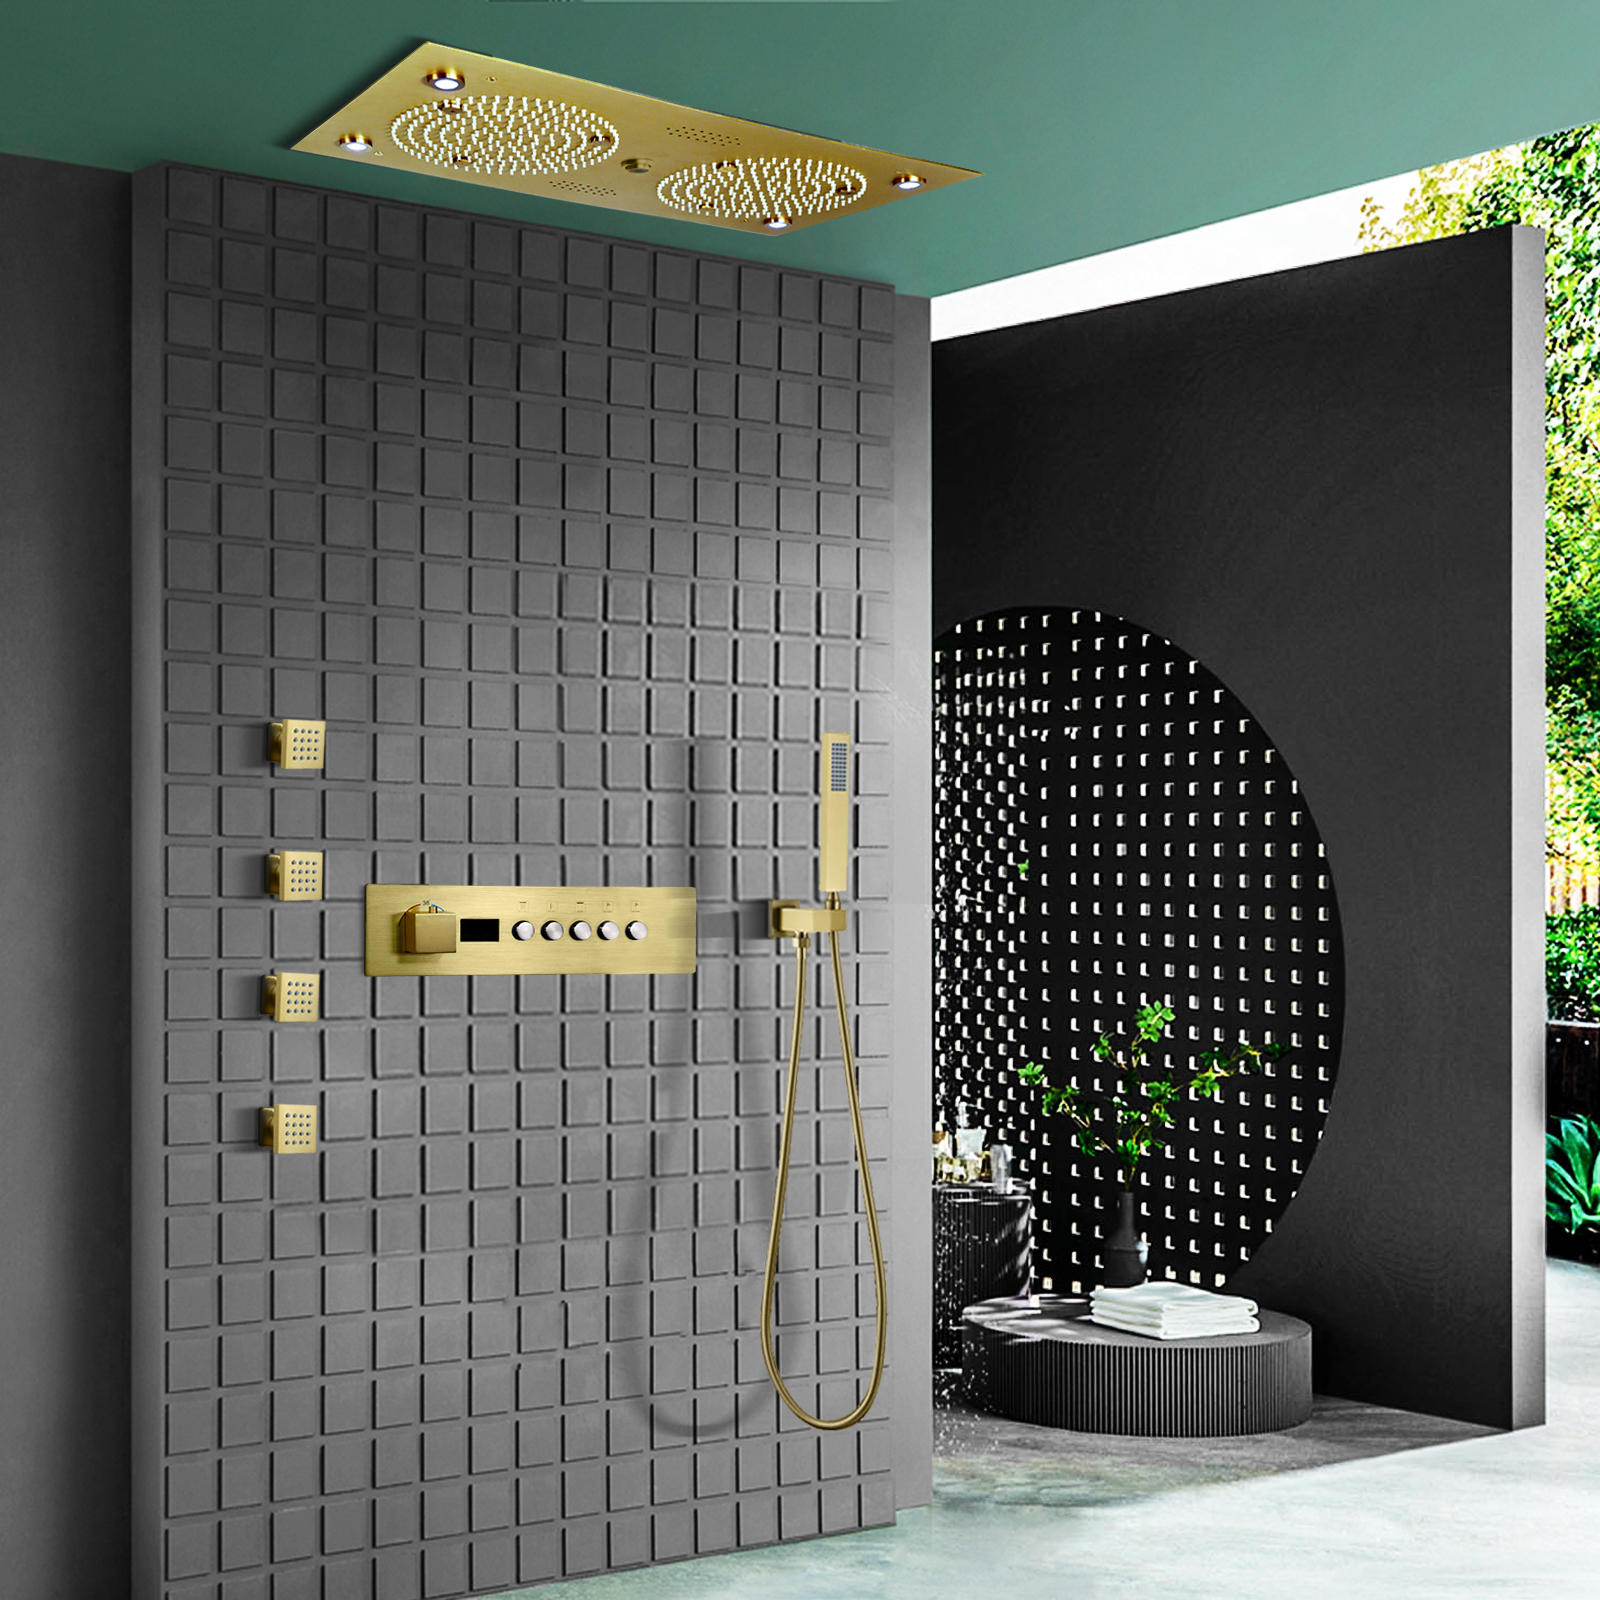 24.5x12.5 Inch Brushed Gold LED Music Shower System Set Bathroom Shower Height Temperature Water Dragon Massage Head Injection